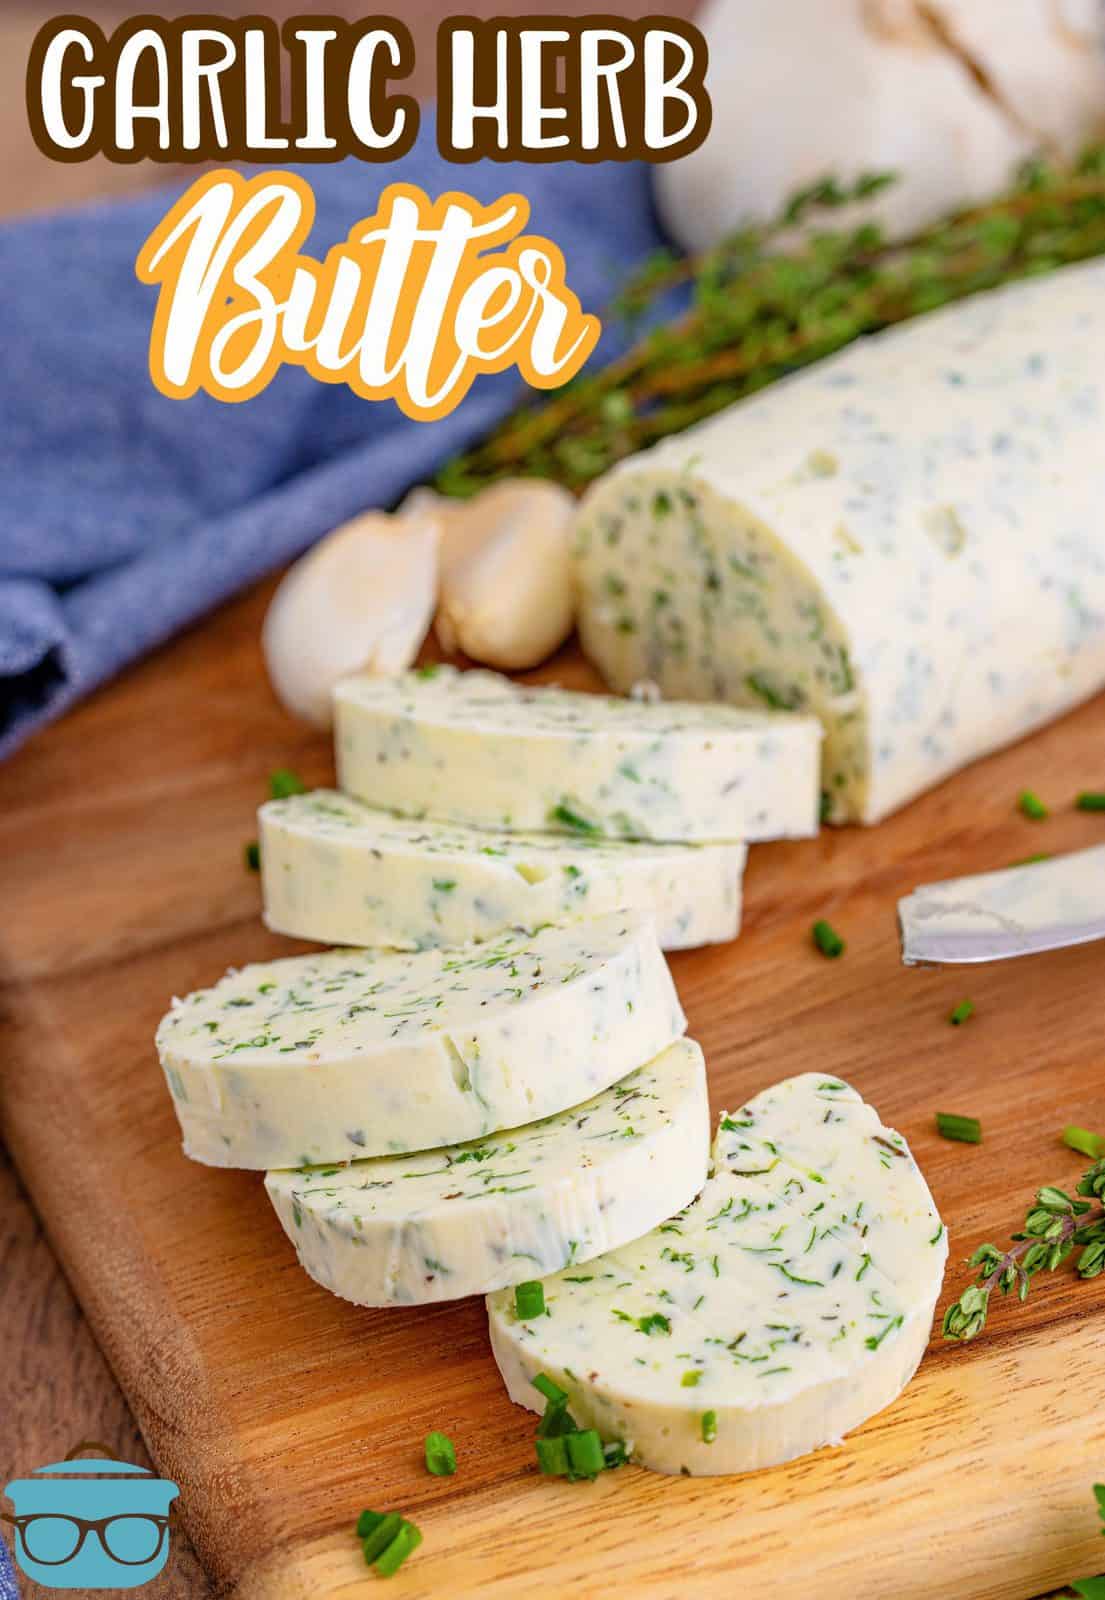 Sliced Garlic Herb Butter in rounds on wooden board with herbs next to butter Pinterest image.